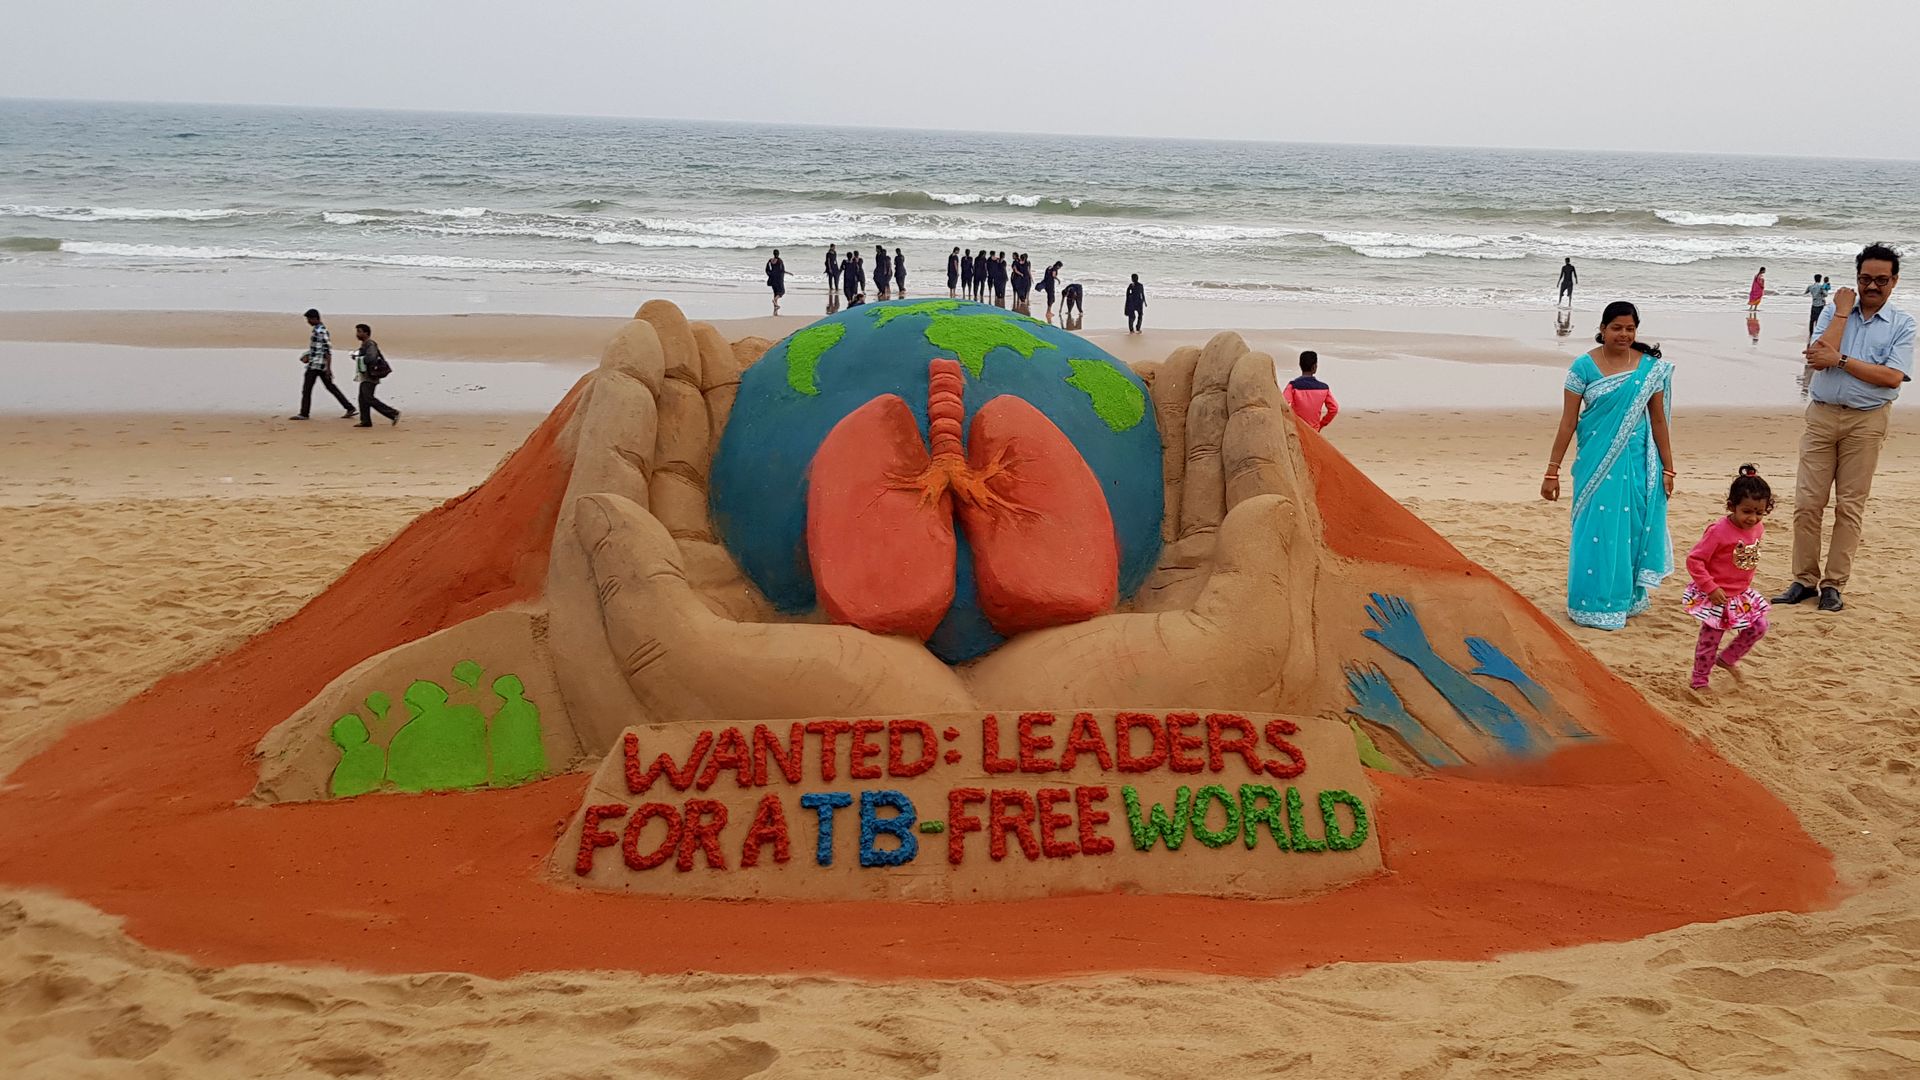 Photo of sand sculpture in India urging leaders to create a TB-free world